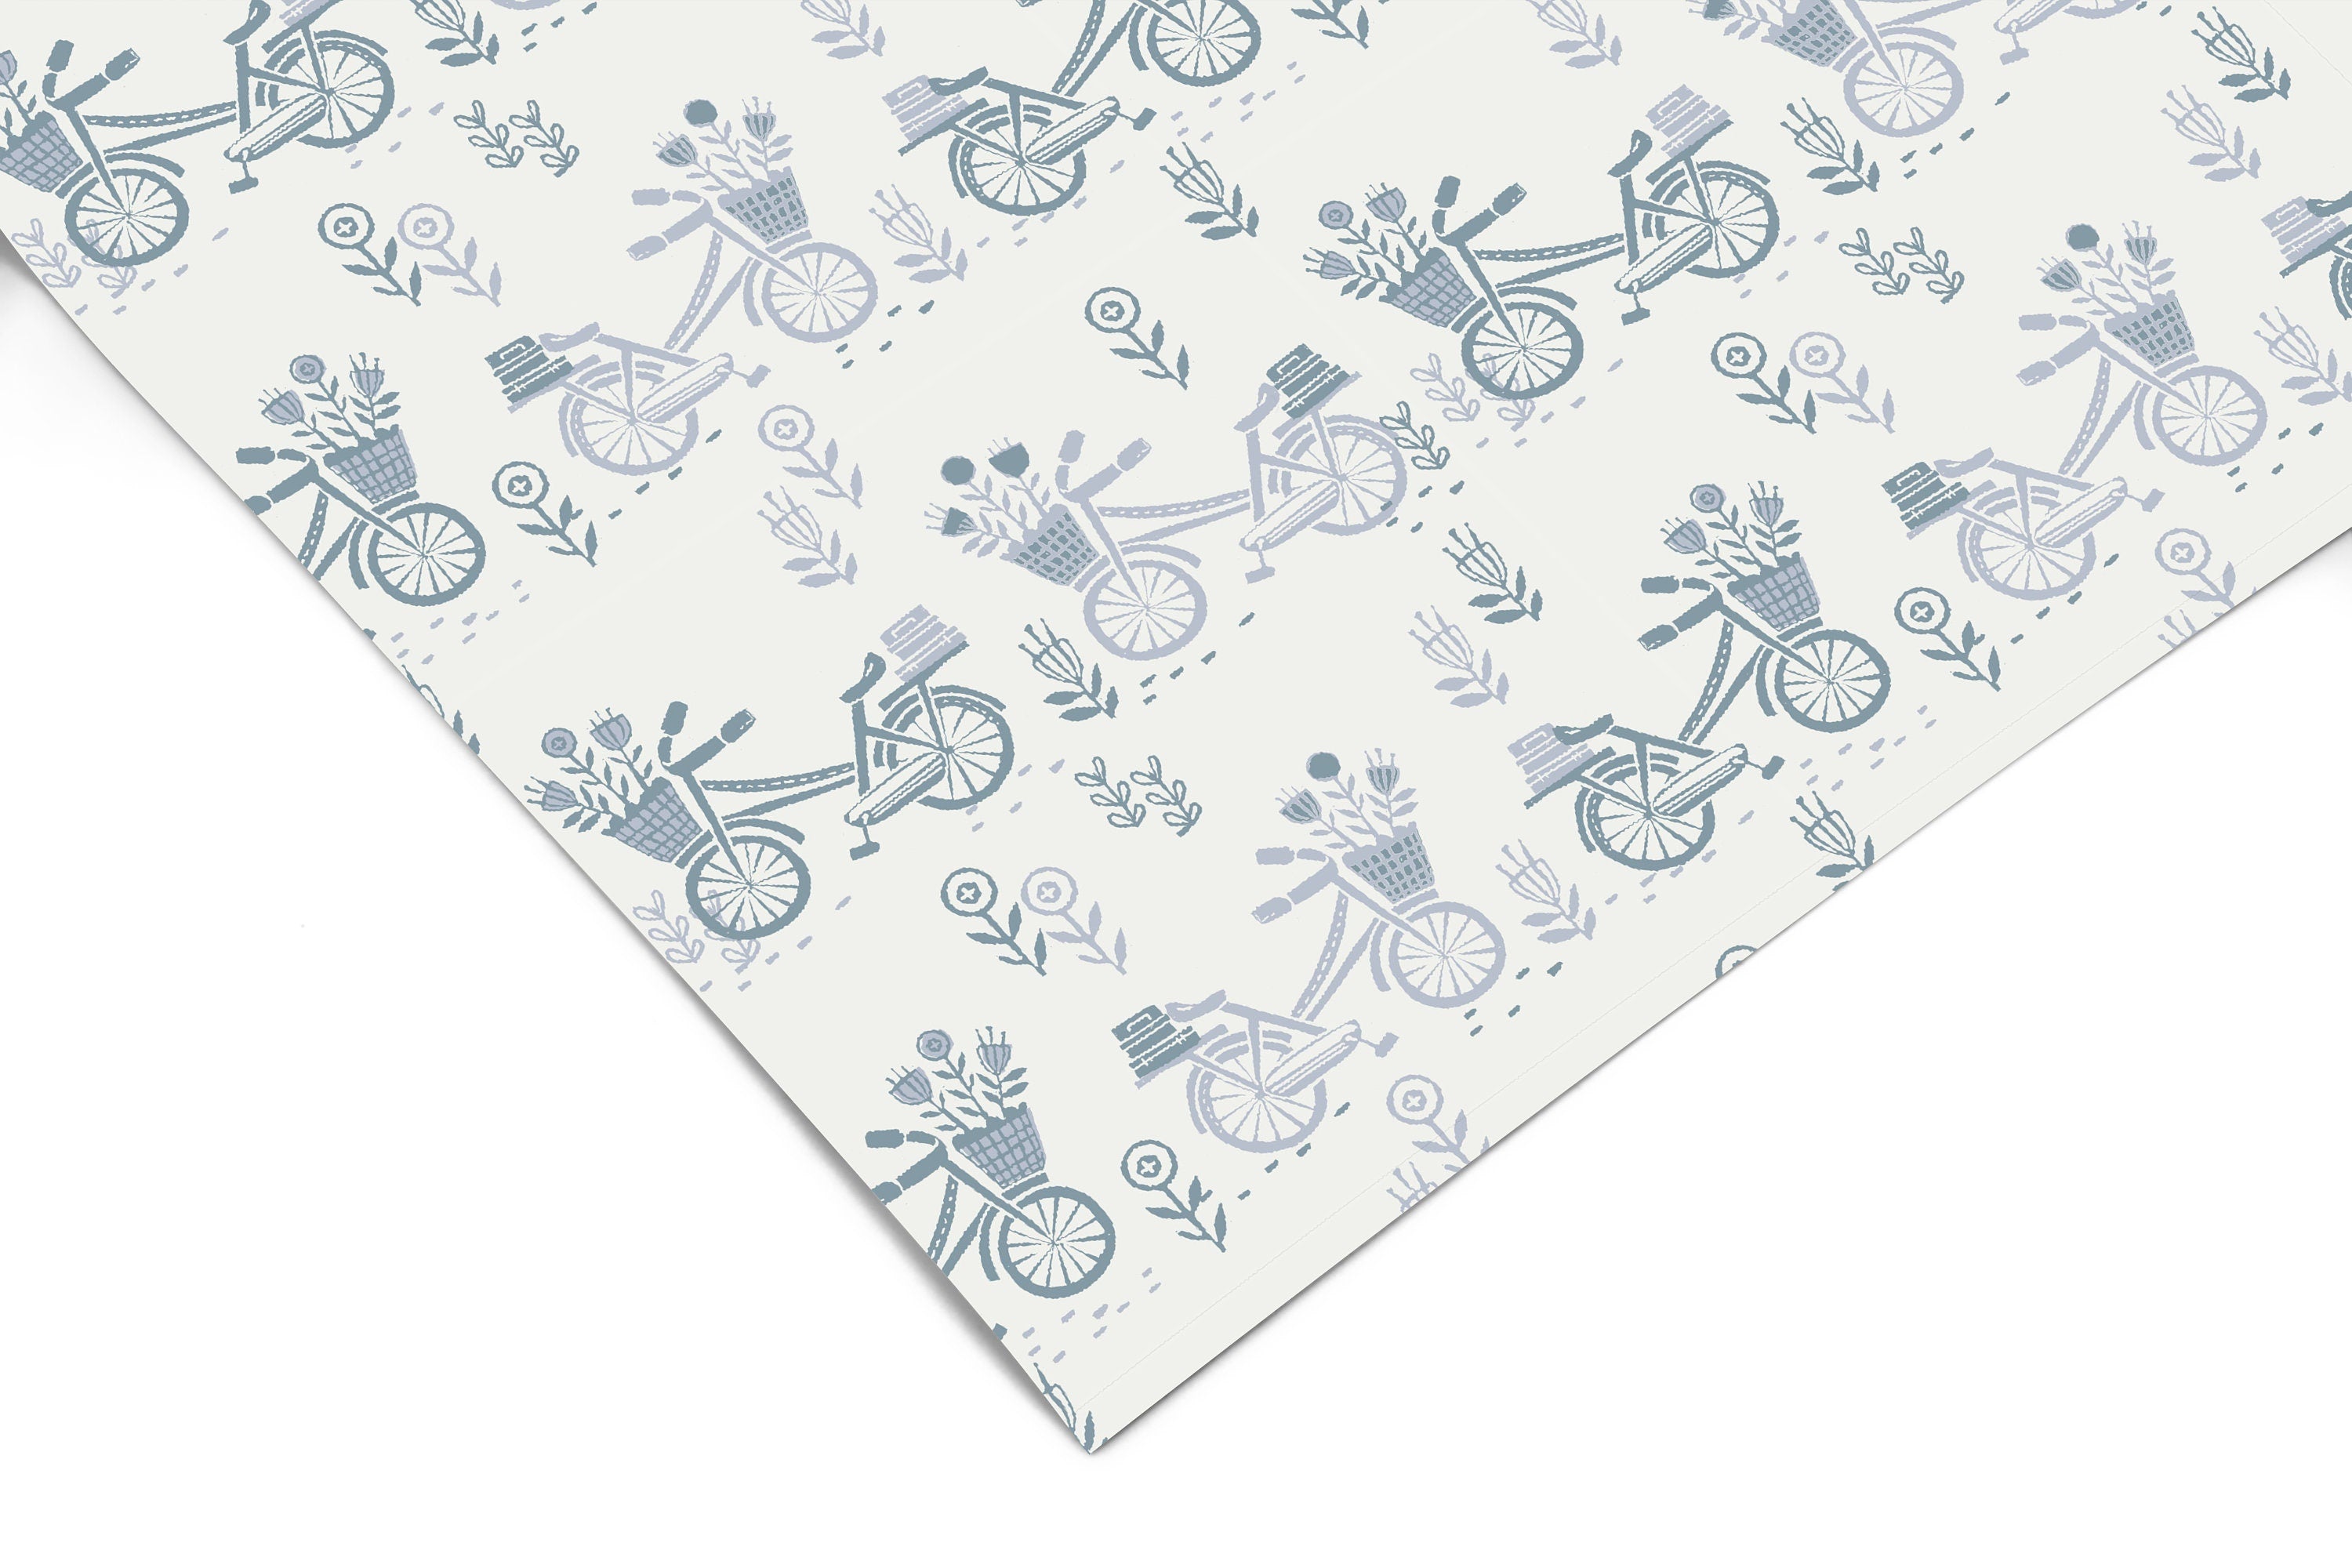 Blue Bicycles Floral Contact Paper | Peel And Stick Wallpaper | Removable Wallpaper | Shelf Liner | Drawer Liner Peel and Stick Paper 1095